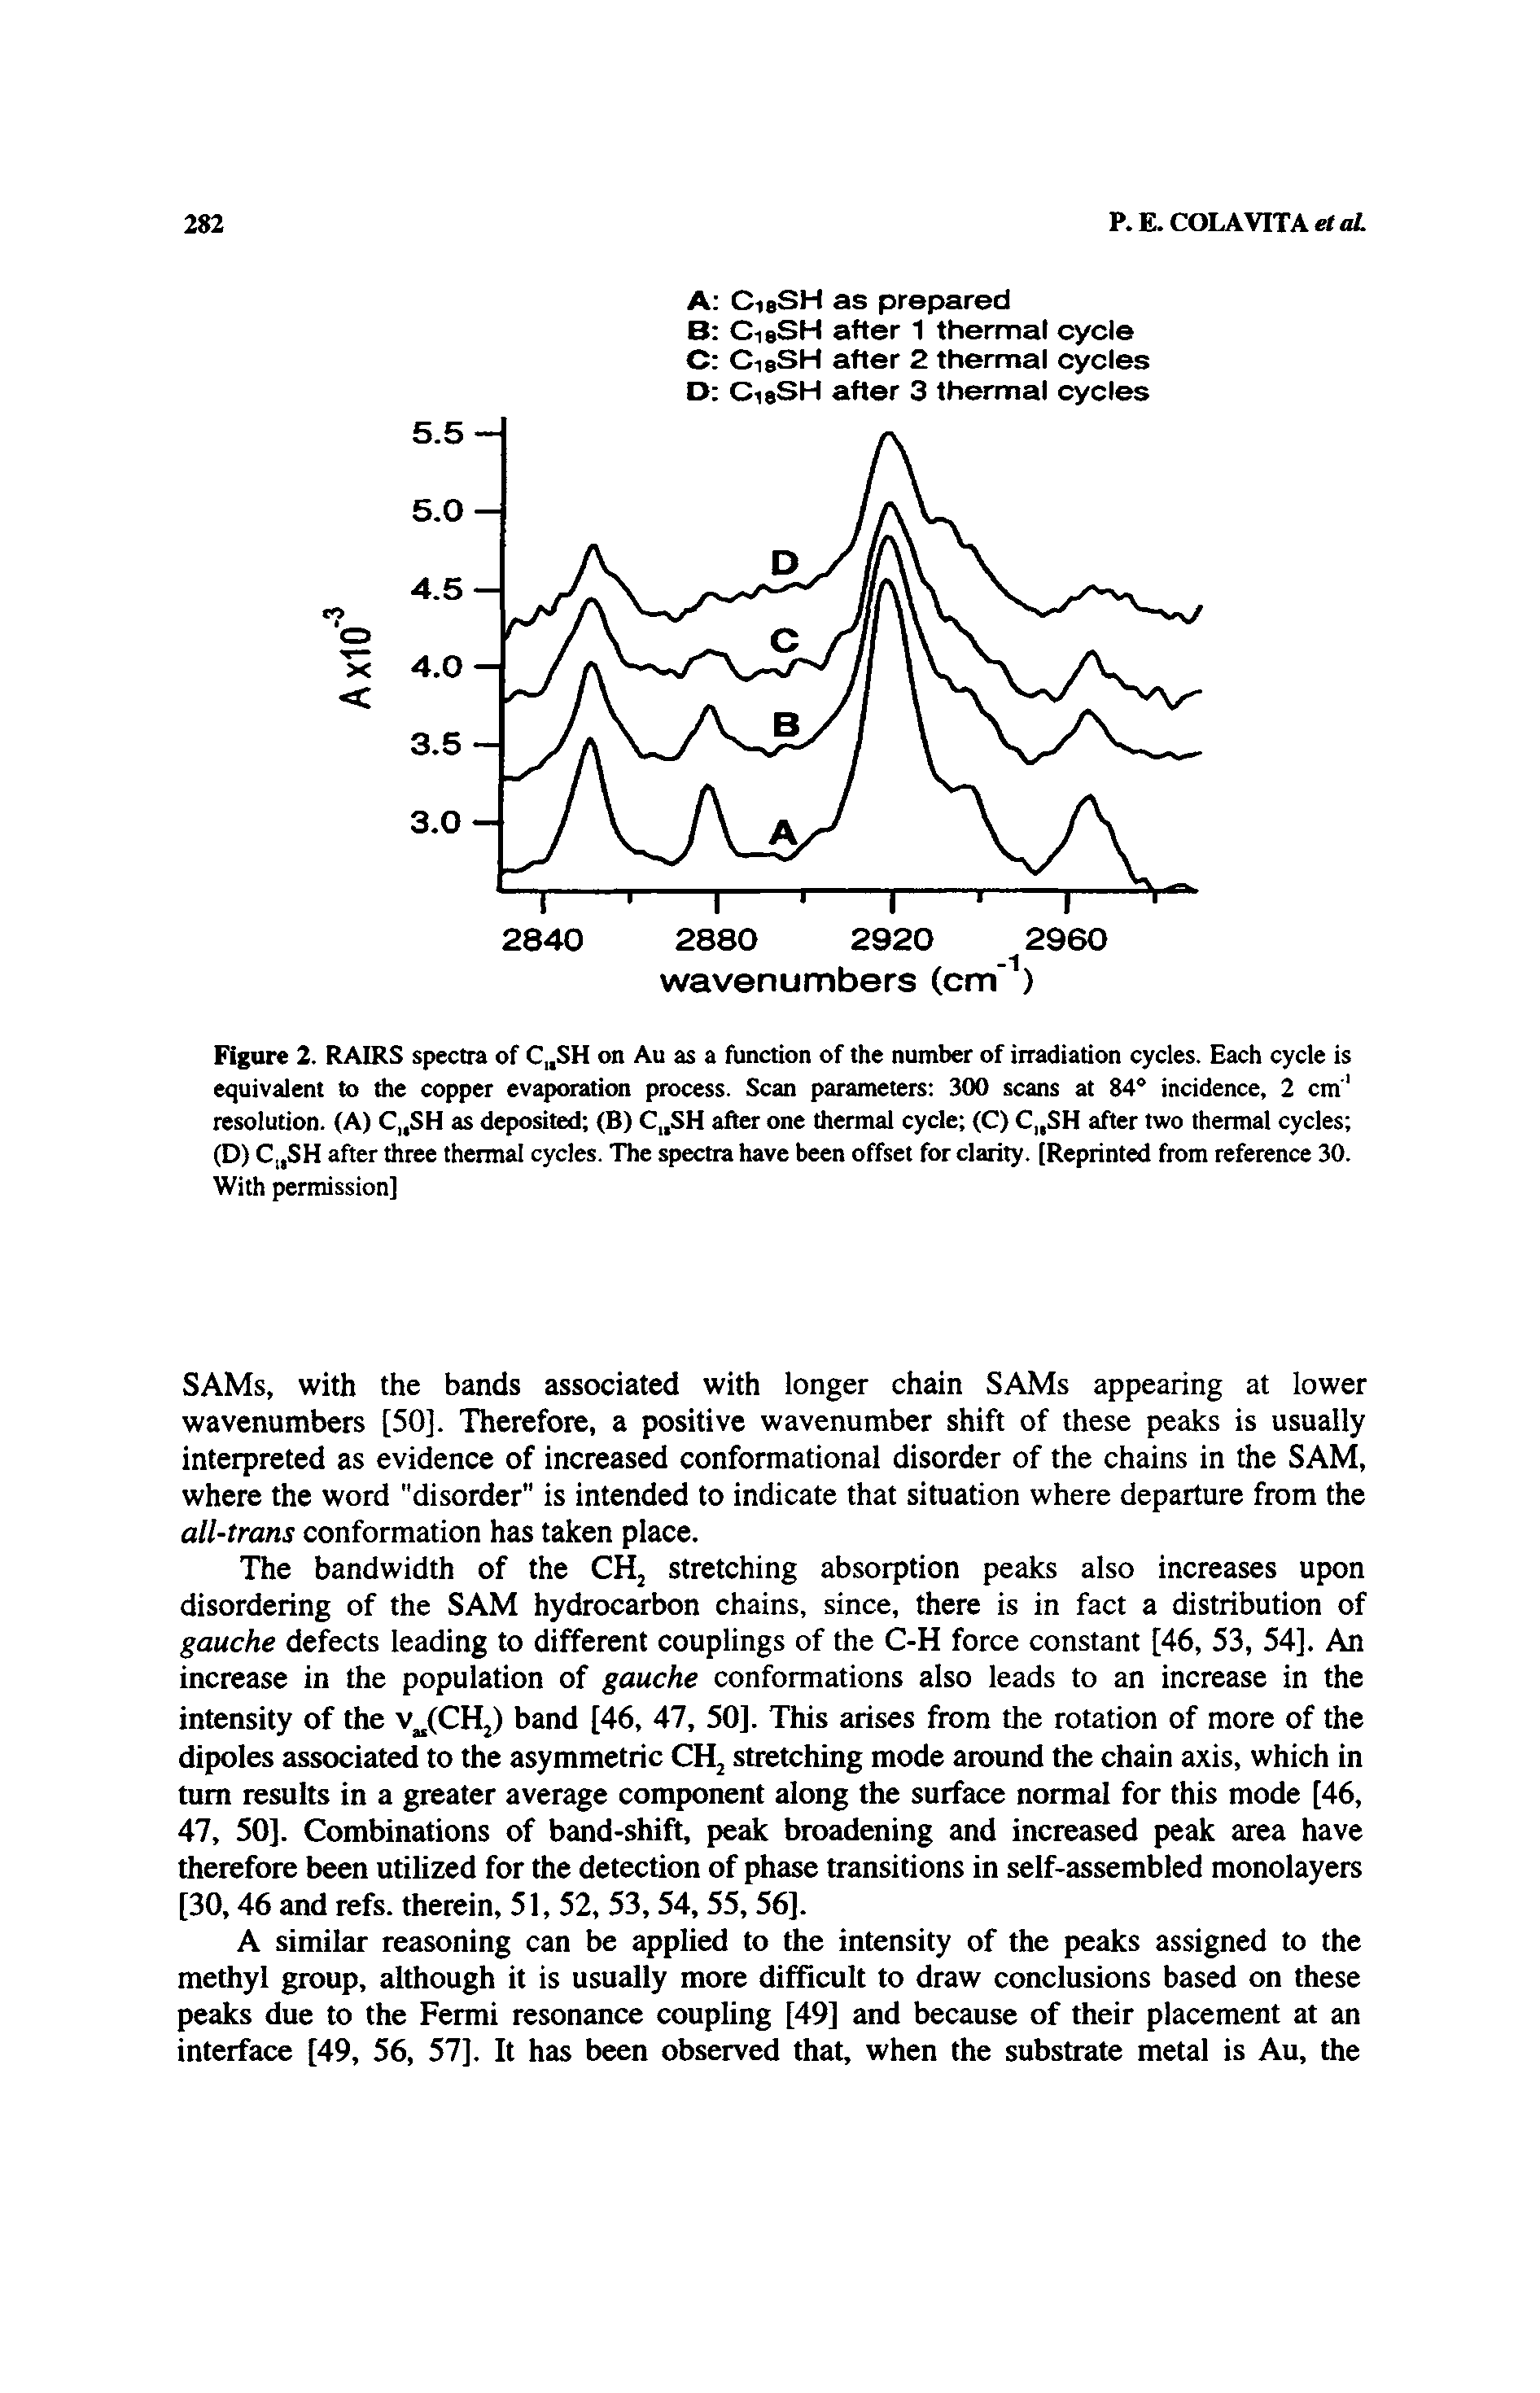 Figure 2. RAIRS spectra of C SH on Au as a function of the number of irradiation cycles. Each cycle is equivalent to the copper evaporation process. Scan parameters 300 scans at 84° incidence, 2 cm resolution. (A) C SH as deposited (B) C SH after one thermal cycle (C) C SH after two thermal cycles (D) C SH after three thermal cycles. The spectra have been offset for clarity. (Reprinted from reference 30. With permission]...